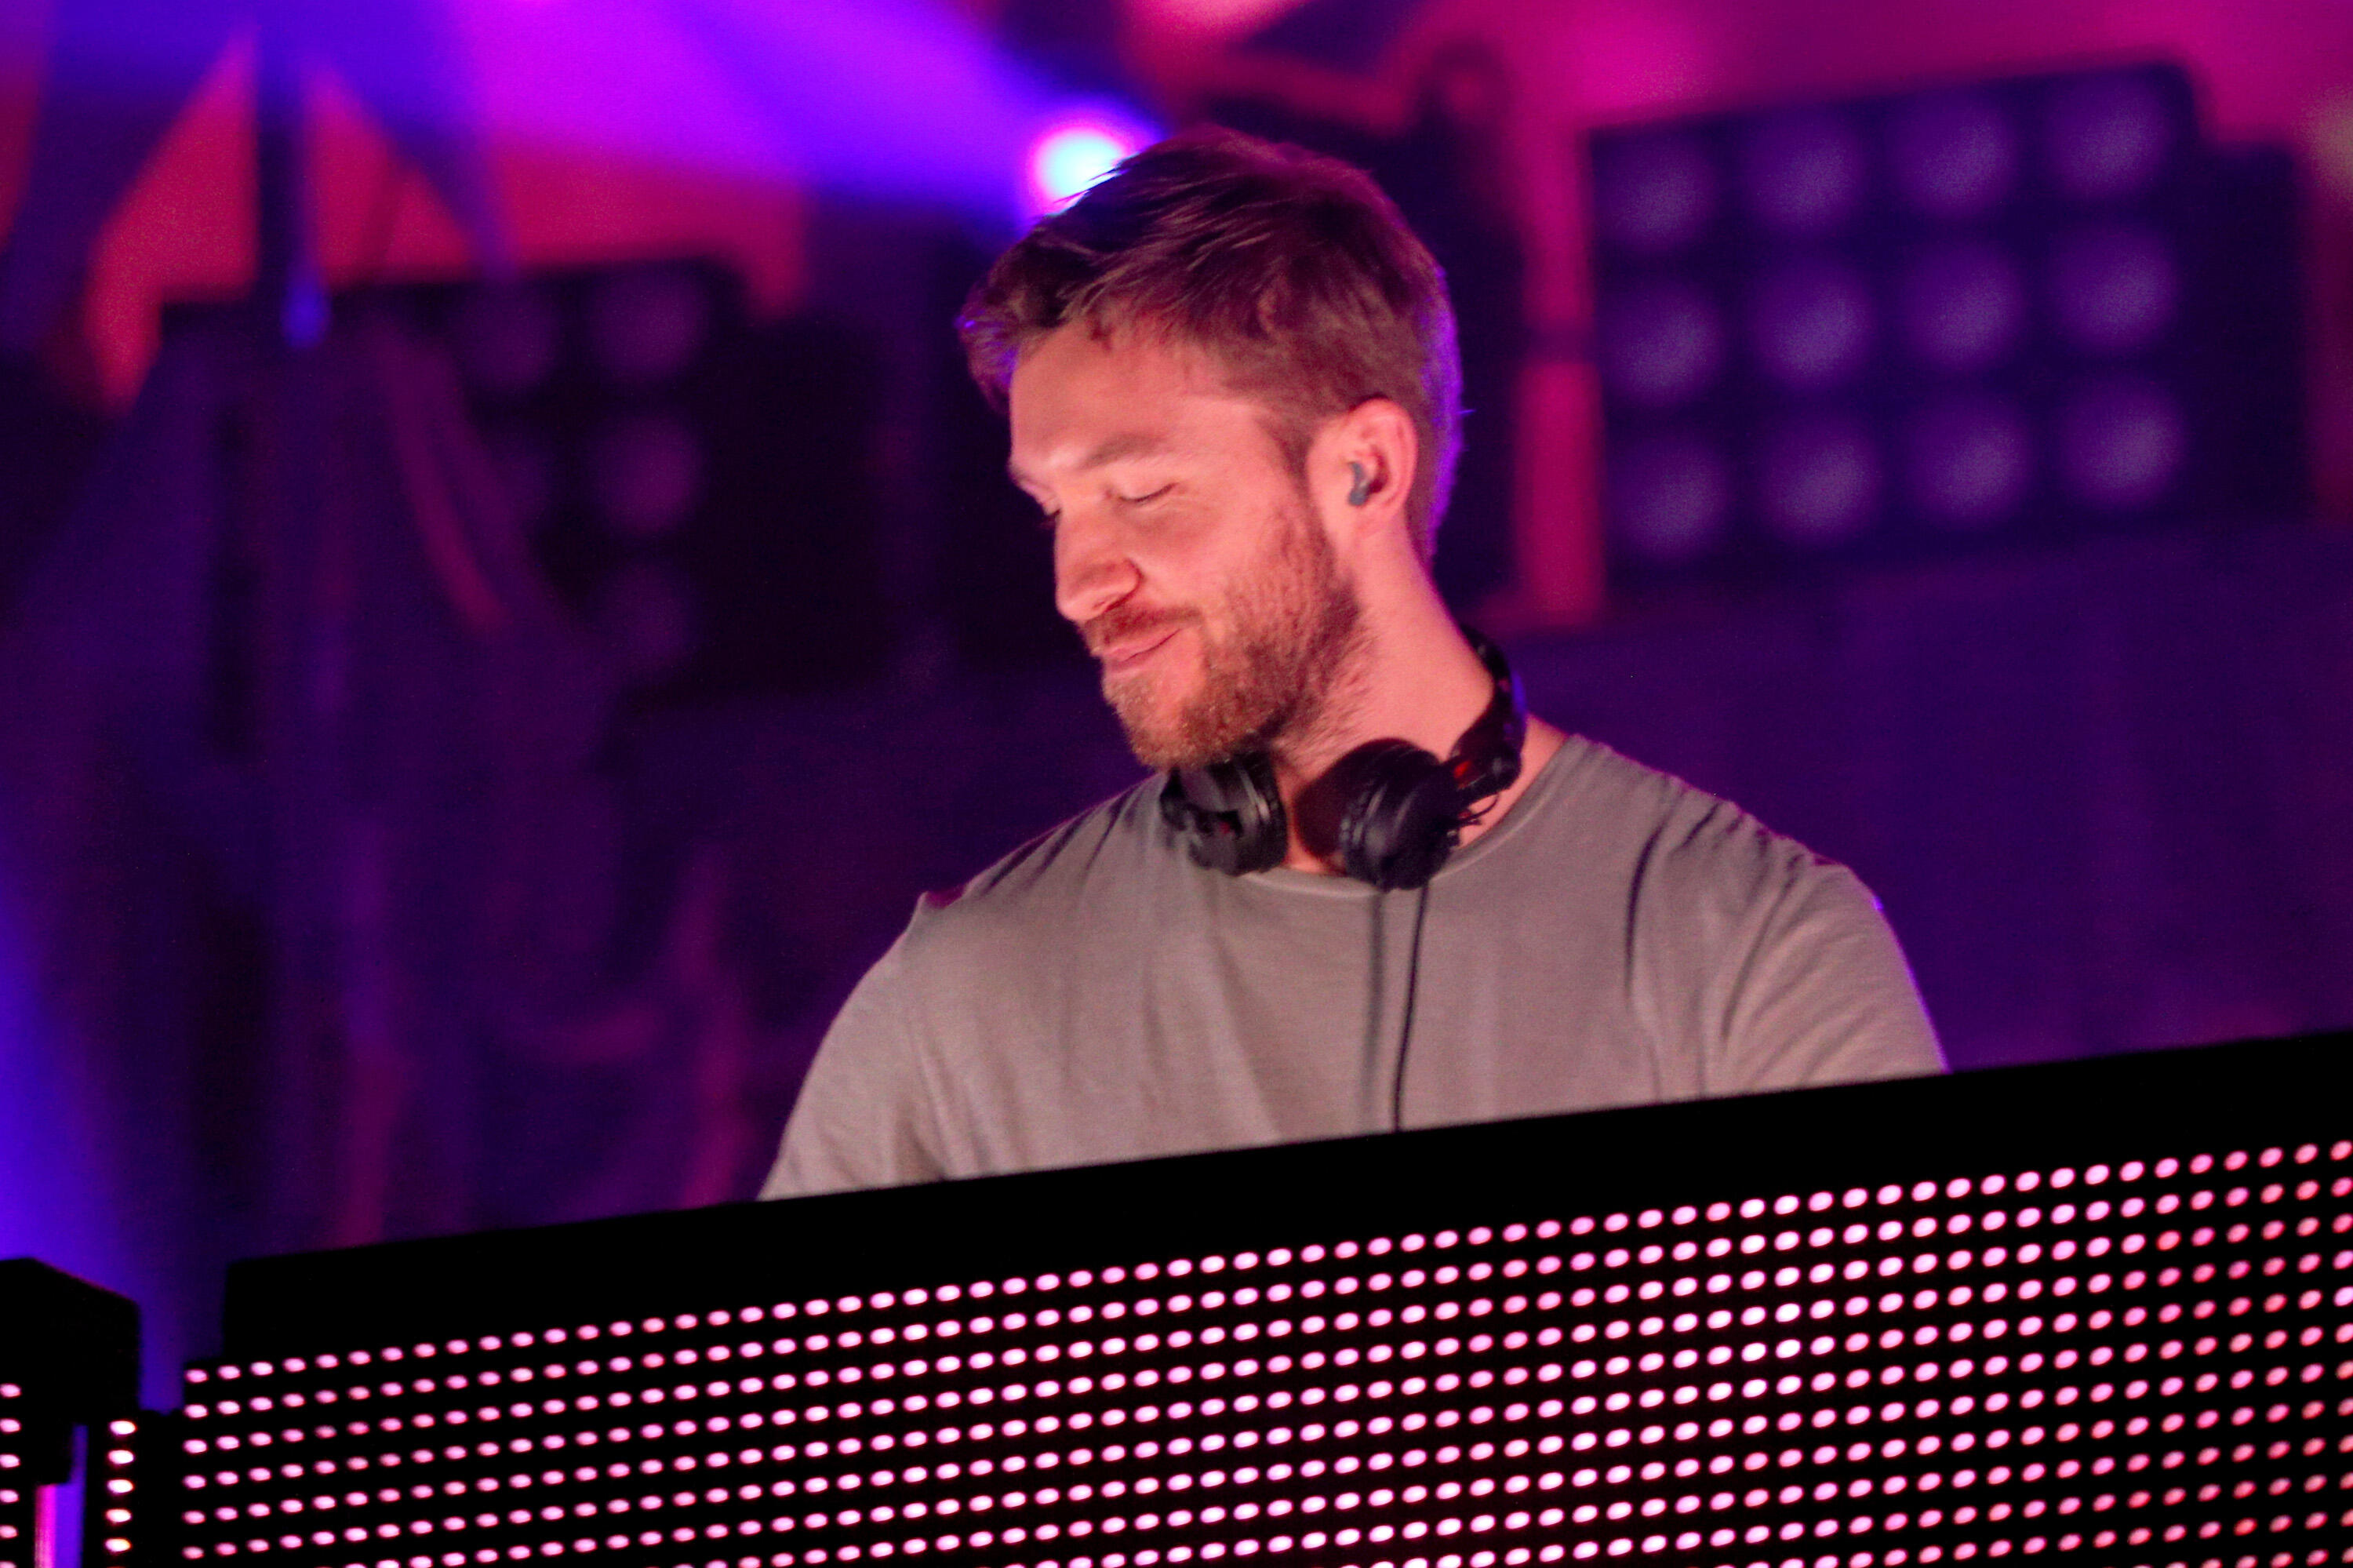 ST PAUL, MN - DECEMBER 07:  DJ Calvin Harris performs onstage during 101.3 KDWB's Jingle Ball 2015 at Xcel Energy Center on December 7, 2015 in St Paul, Minnesota.  (Photo by Adam Bettcher/Getty Images for iHeartMedia)